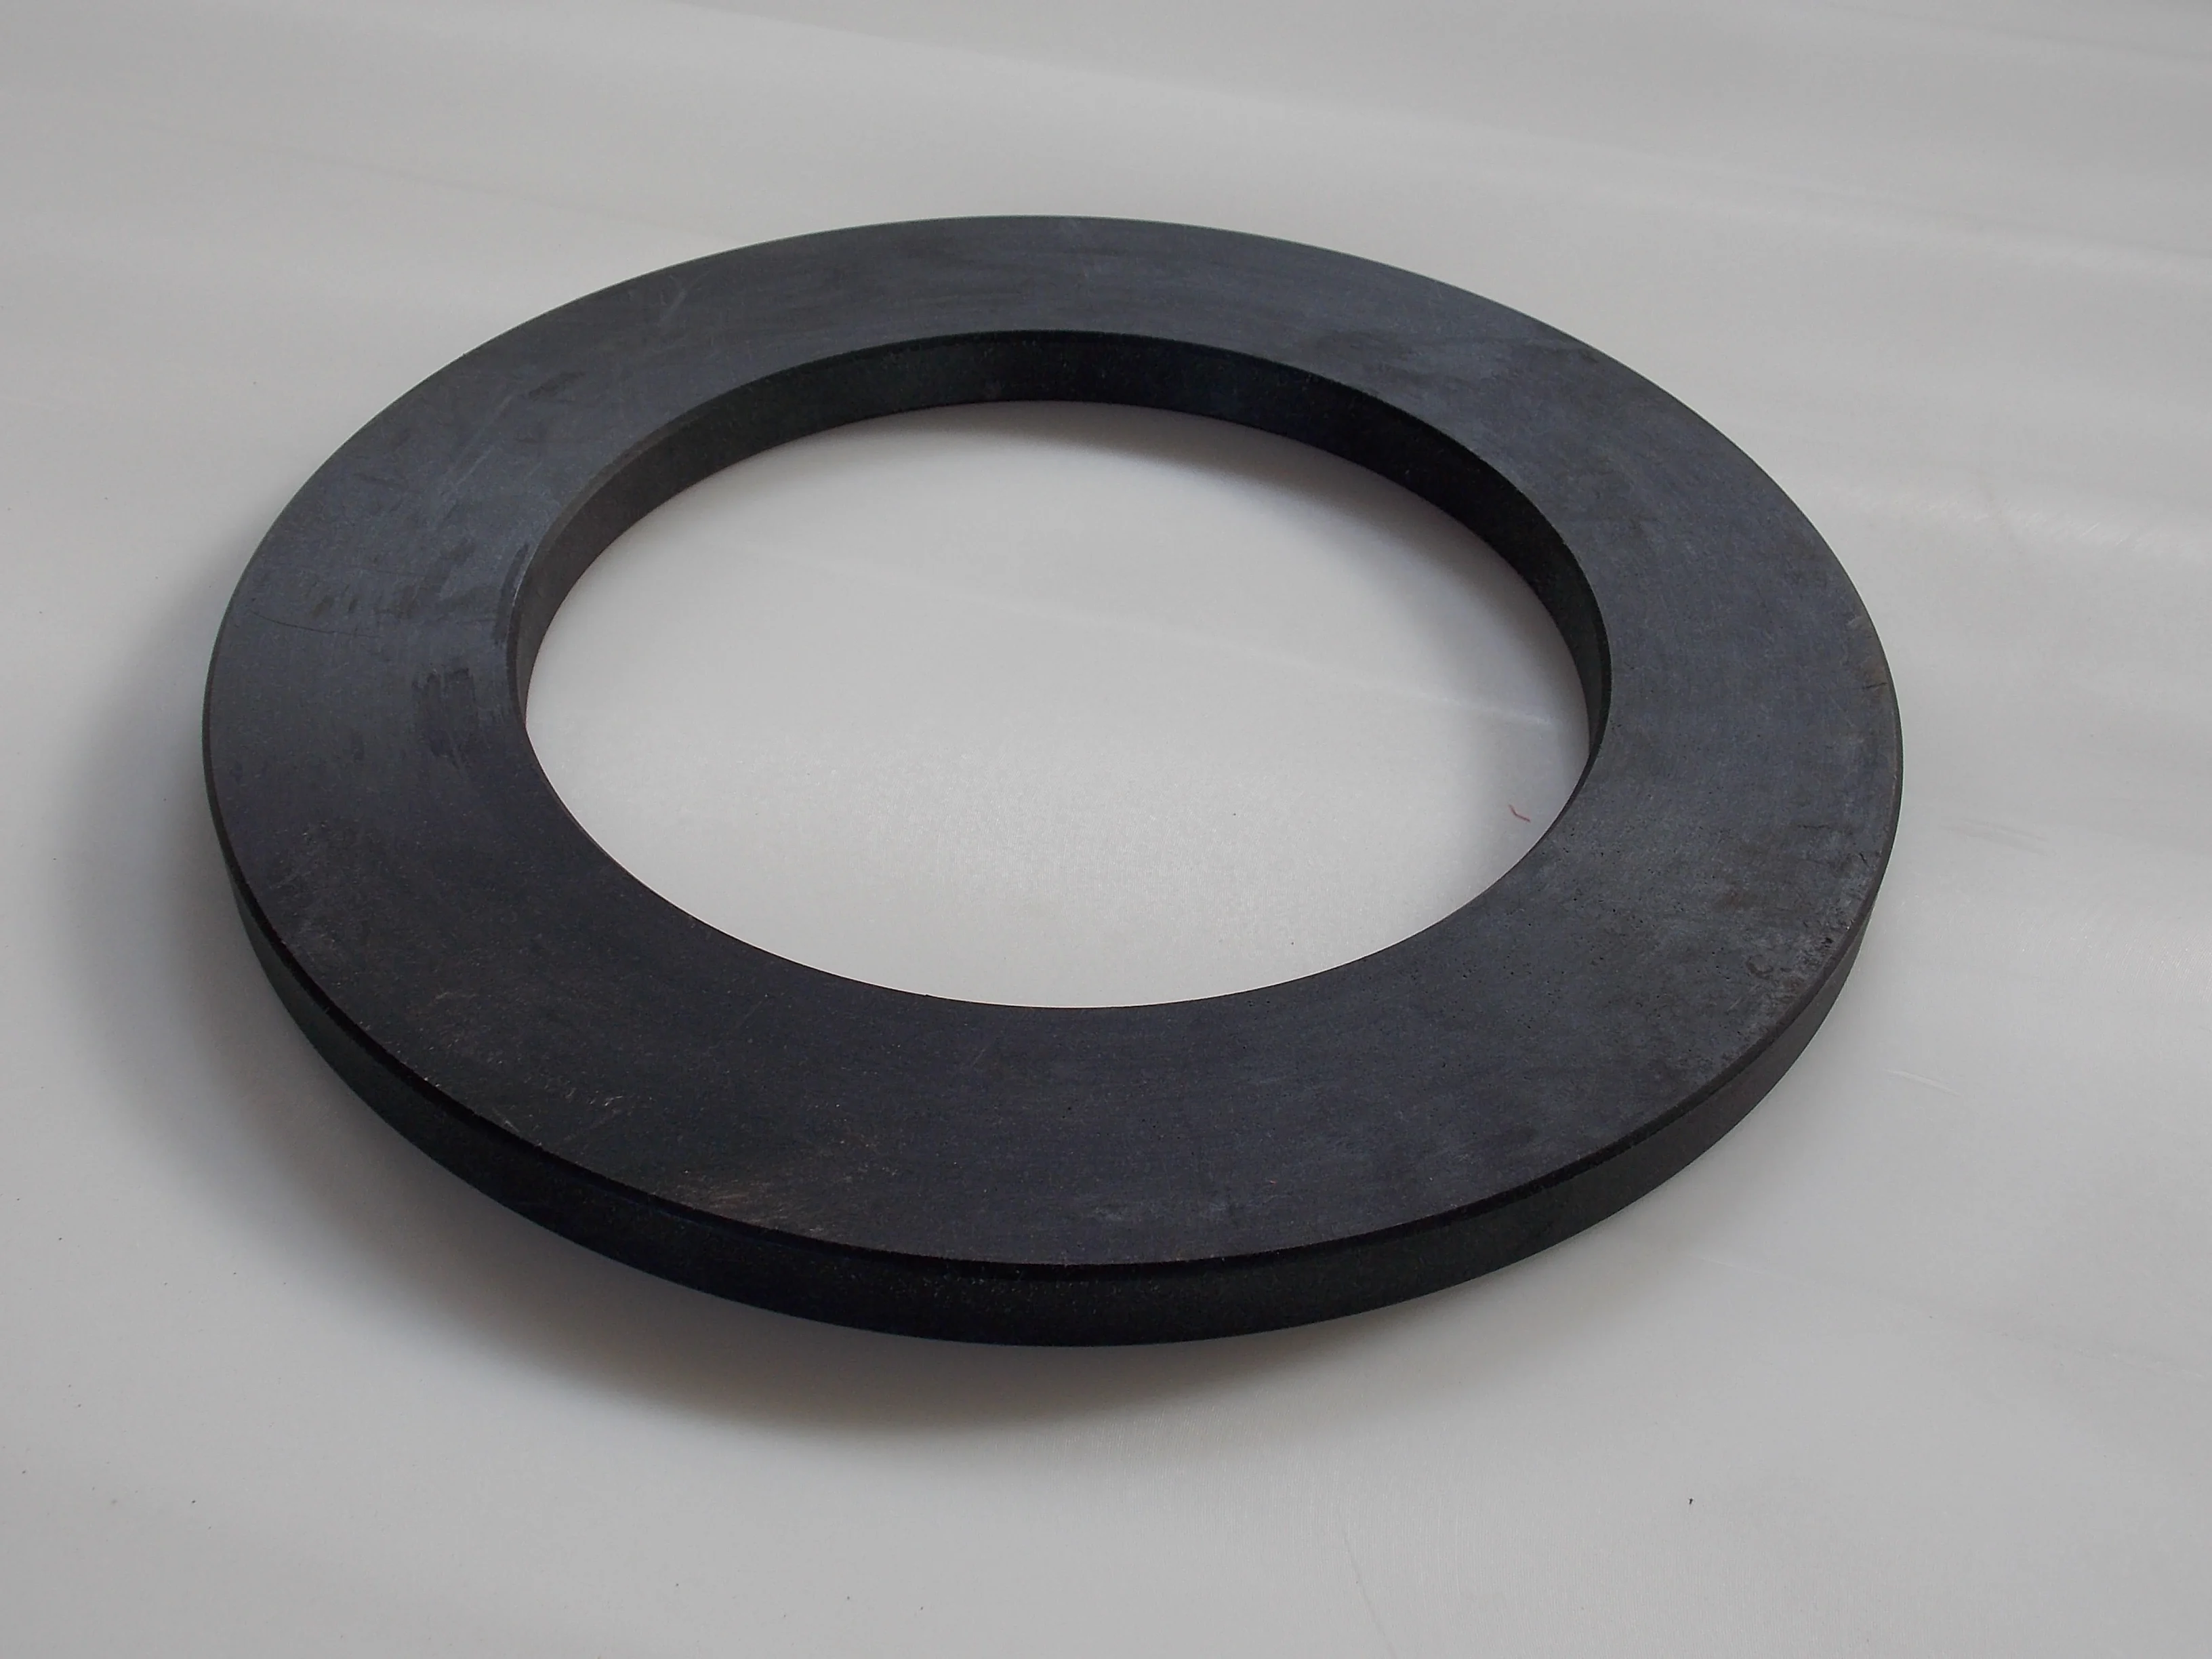 China manufacture engineering plastic alloy sliding bearing/ MGA plastic alloy spacers